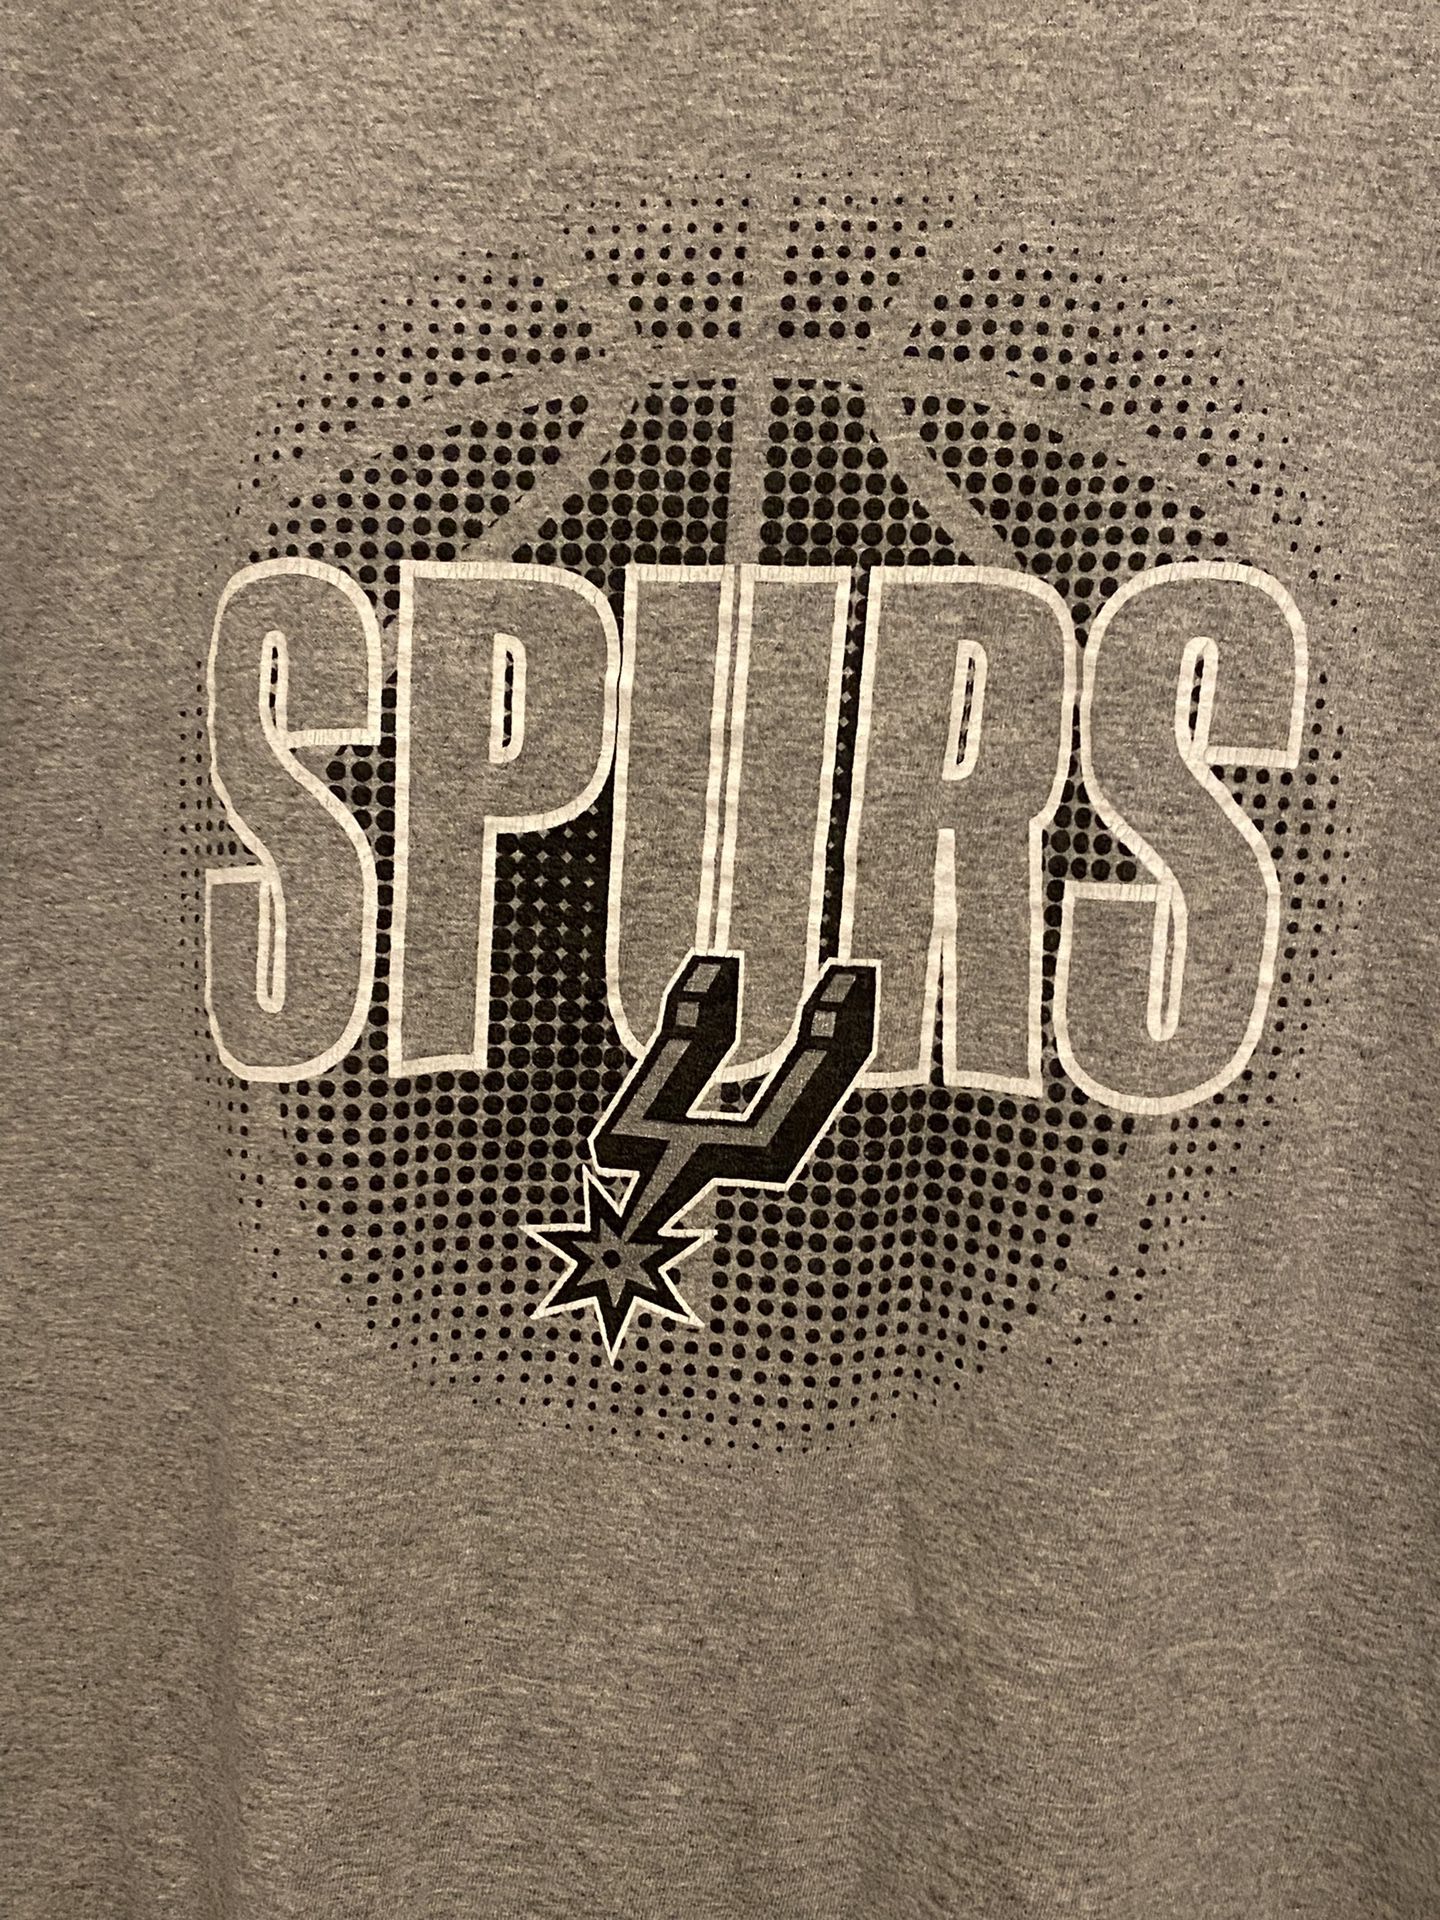 Spurs T-Shirt for Sale in San Antonio, TX - OfferUp